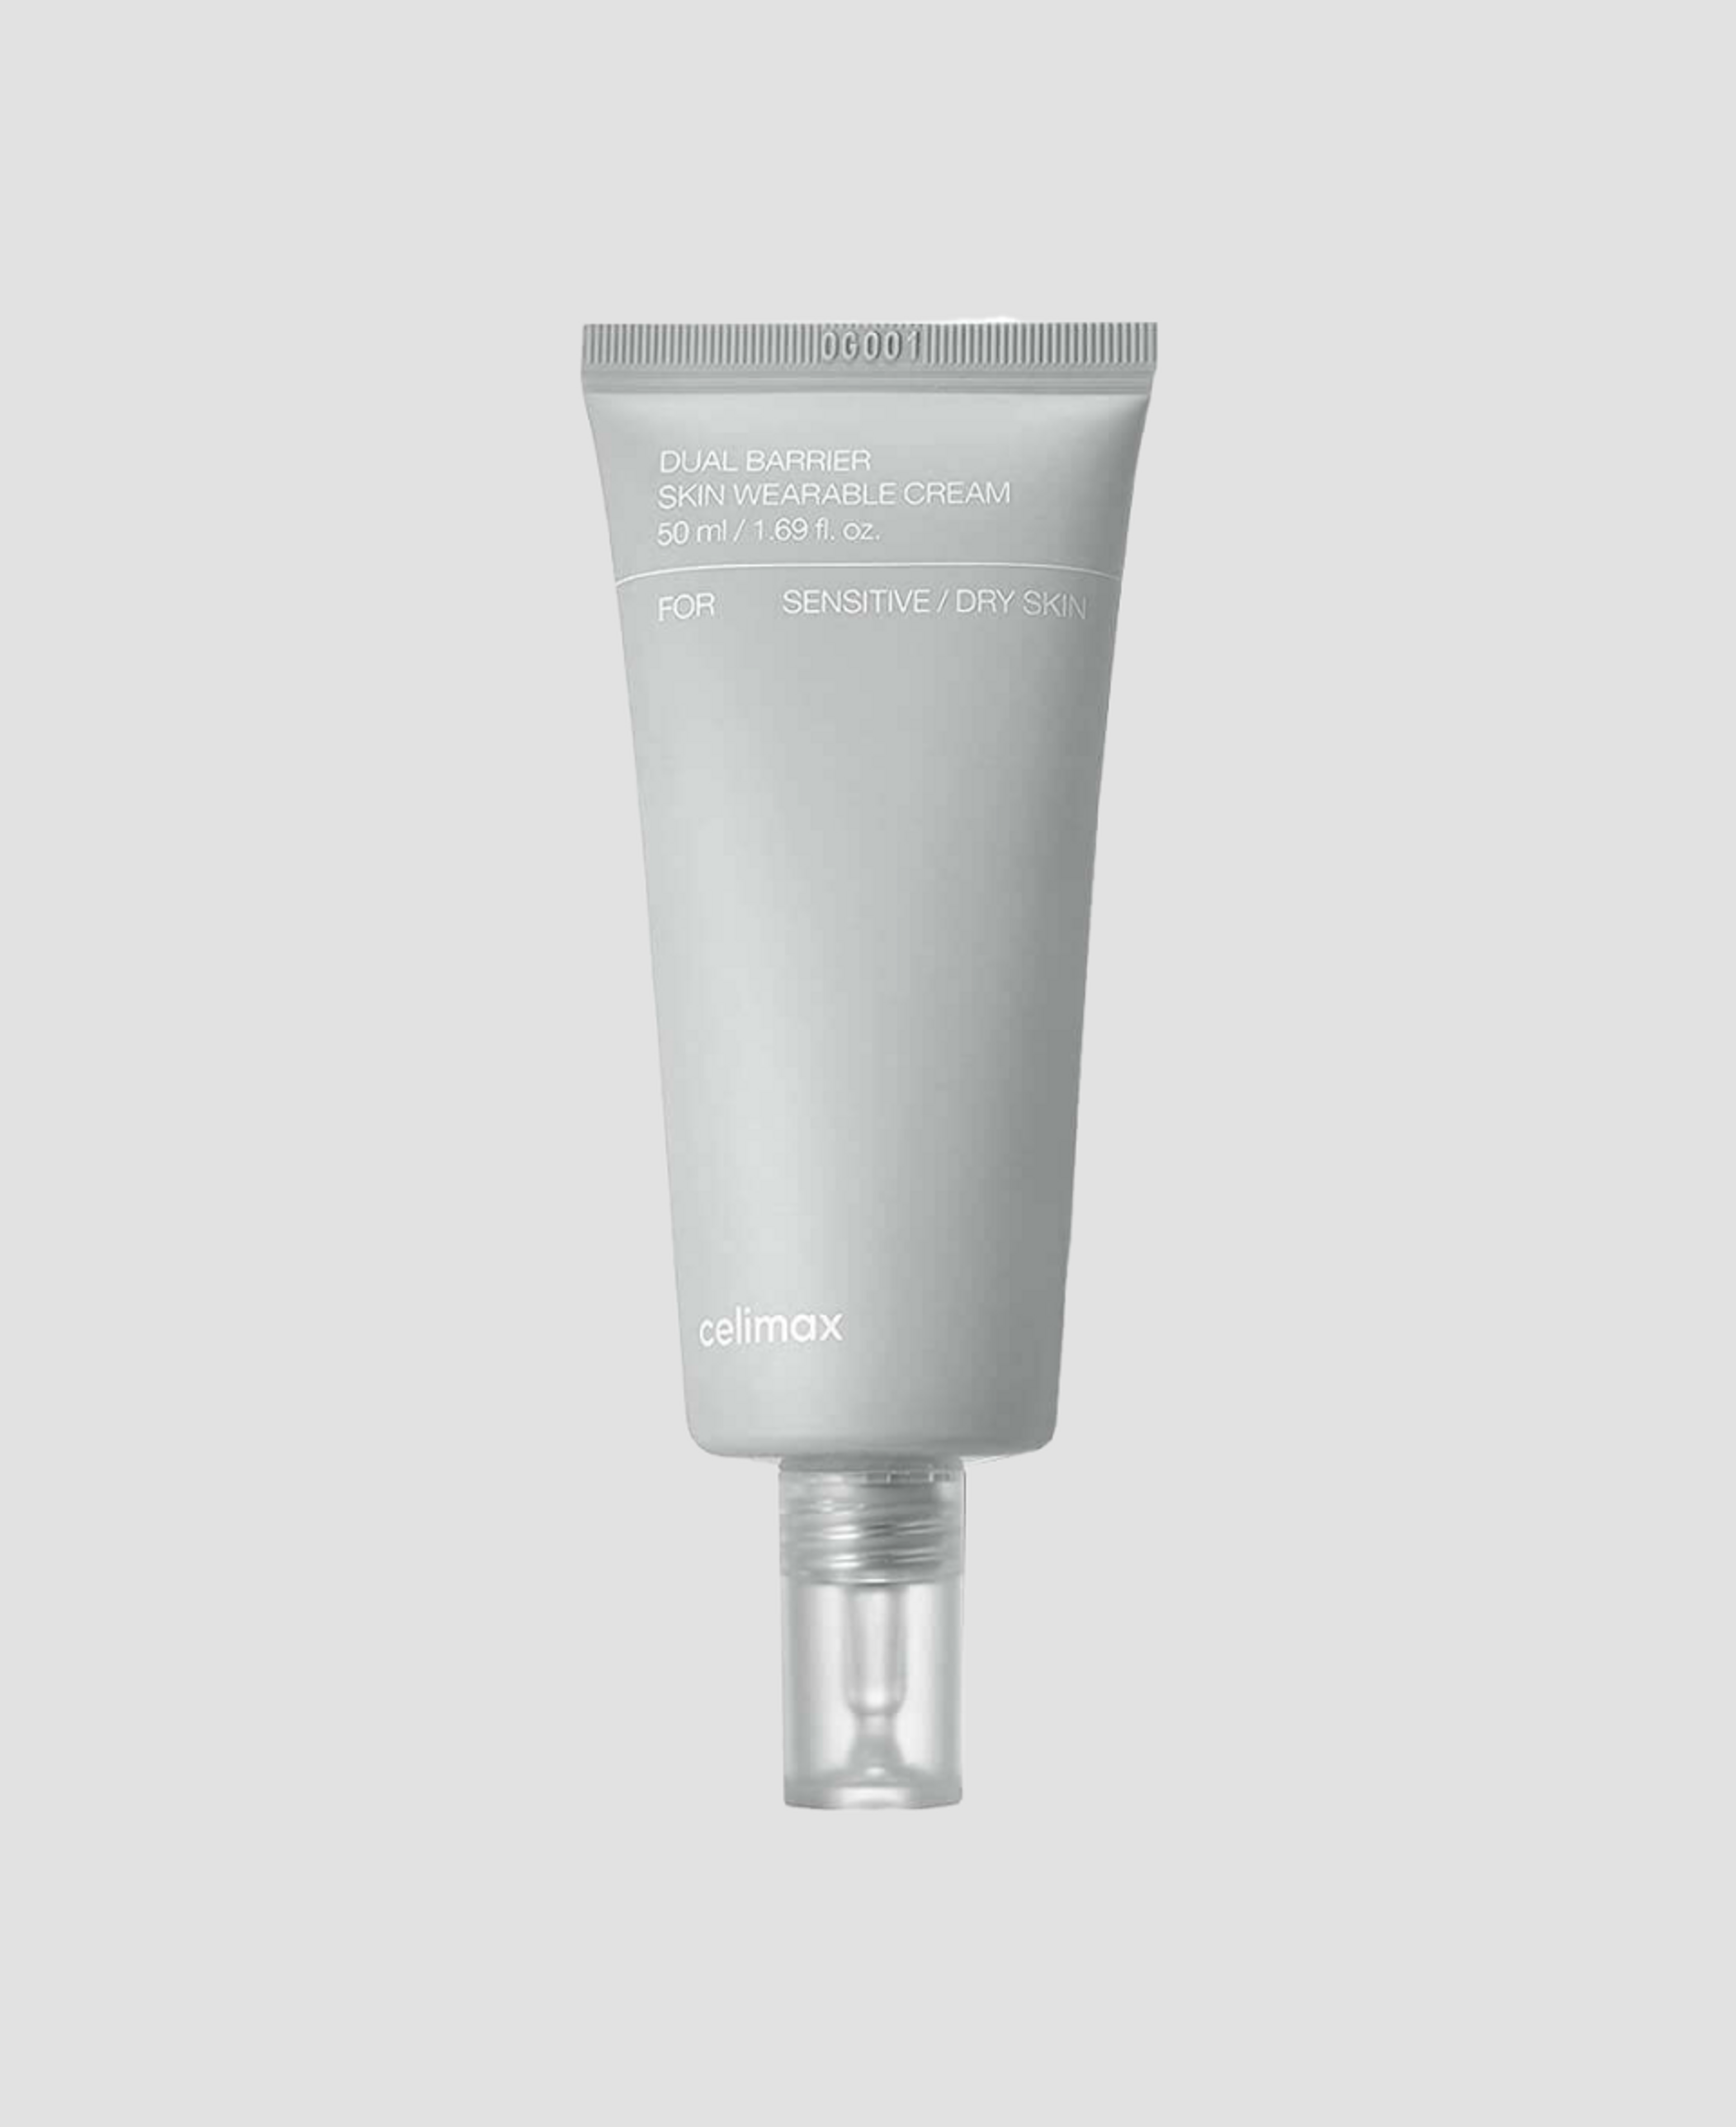 Крем Cellimax Dual Barrier Skin Wearable Cream